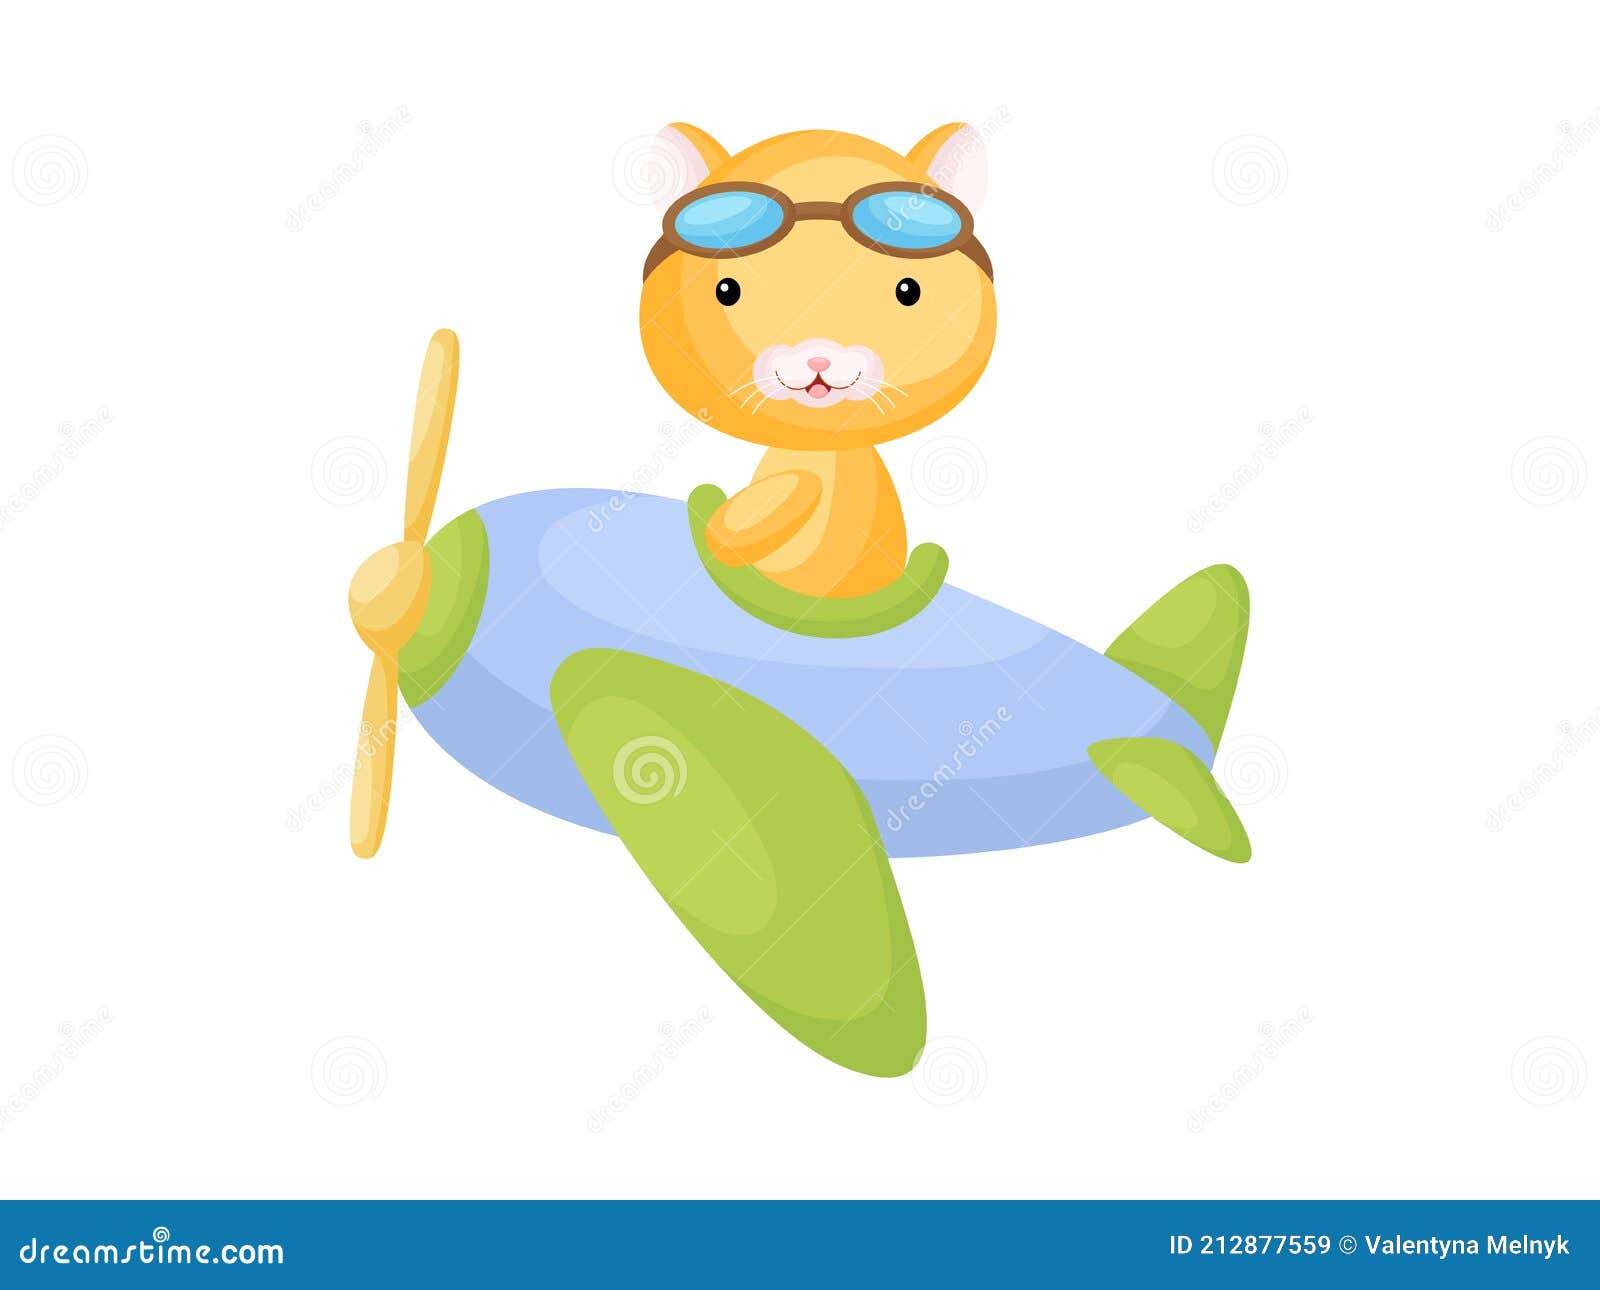 Little Hamster Wearing Aviator Goggles Flying an Airplane. Funny Baby  Character Flying on Plane for Greeting Card, Baby Shower, Stock Vector -  Illustration of baby, childhood: 212877559